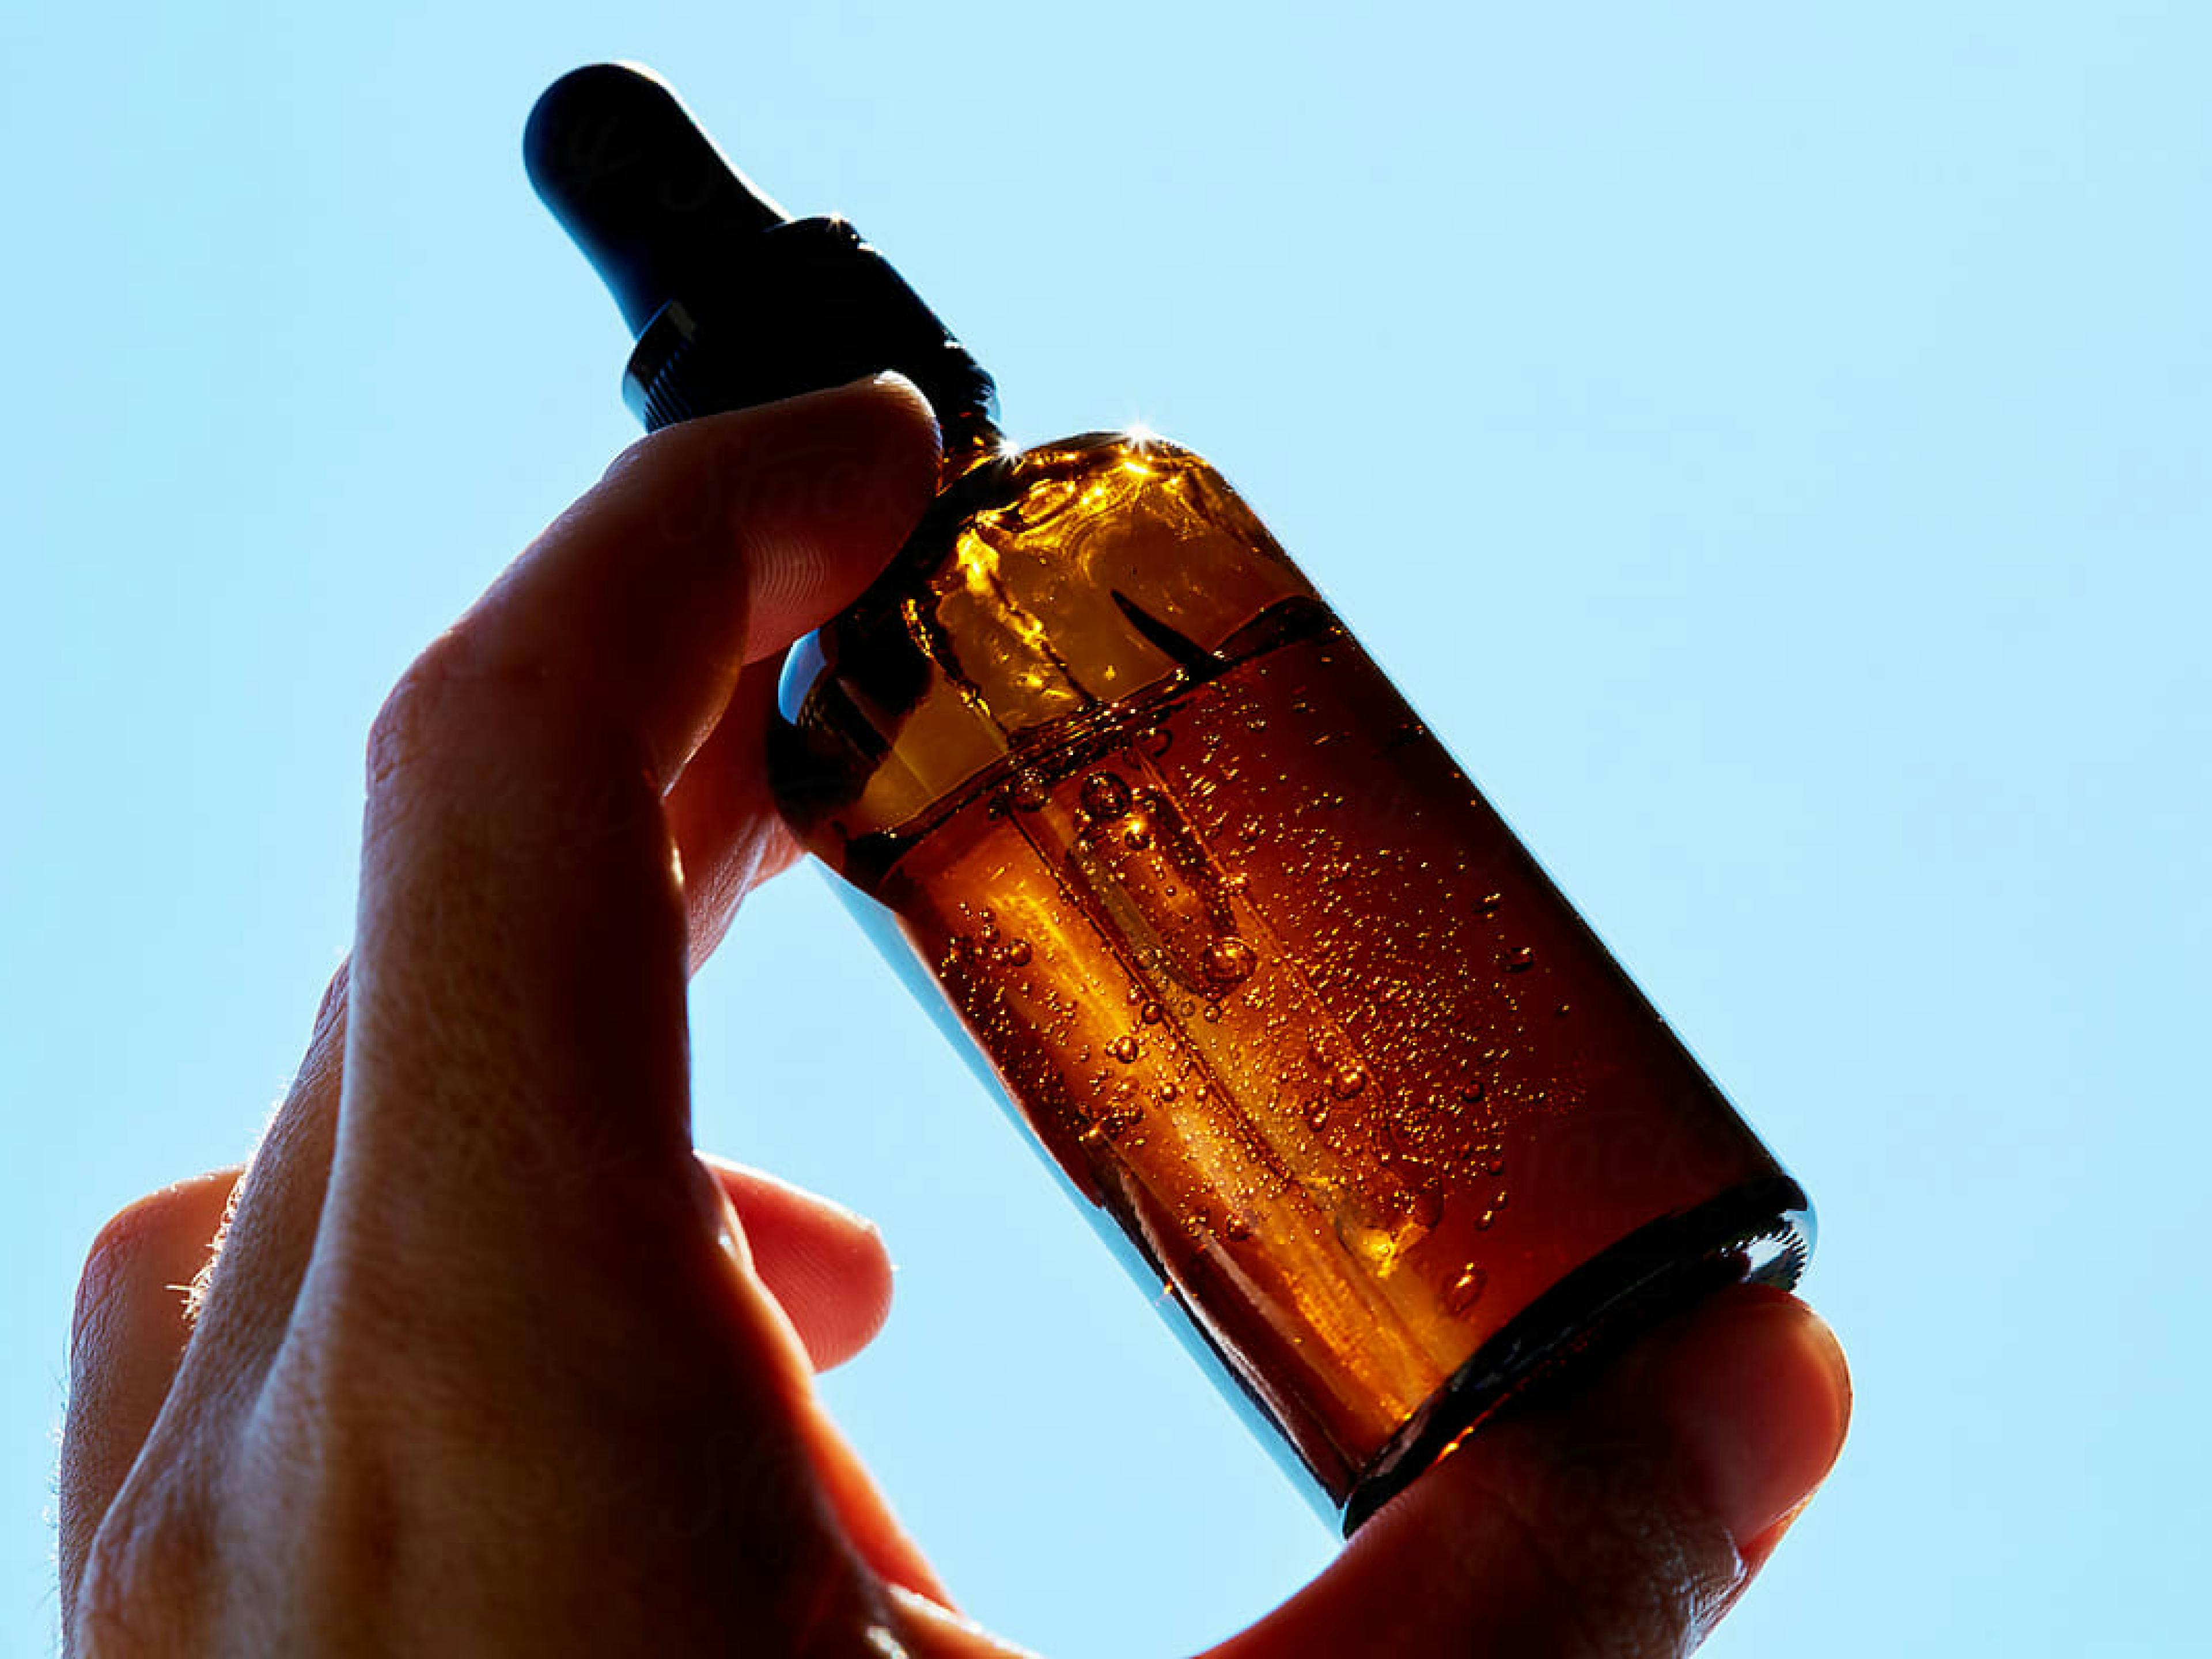 Bottle of serum against a blue background